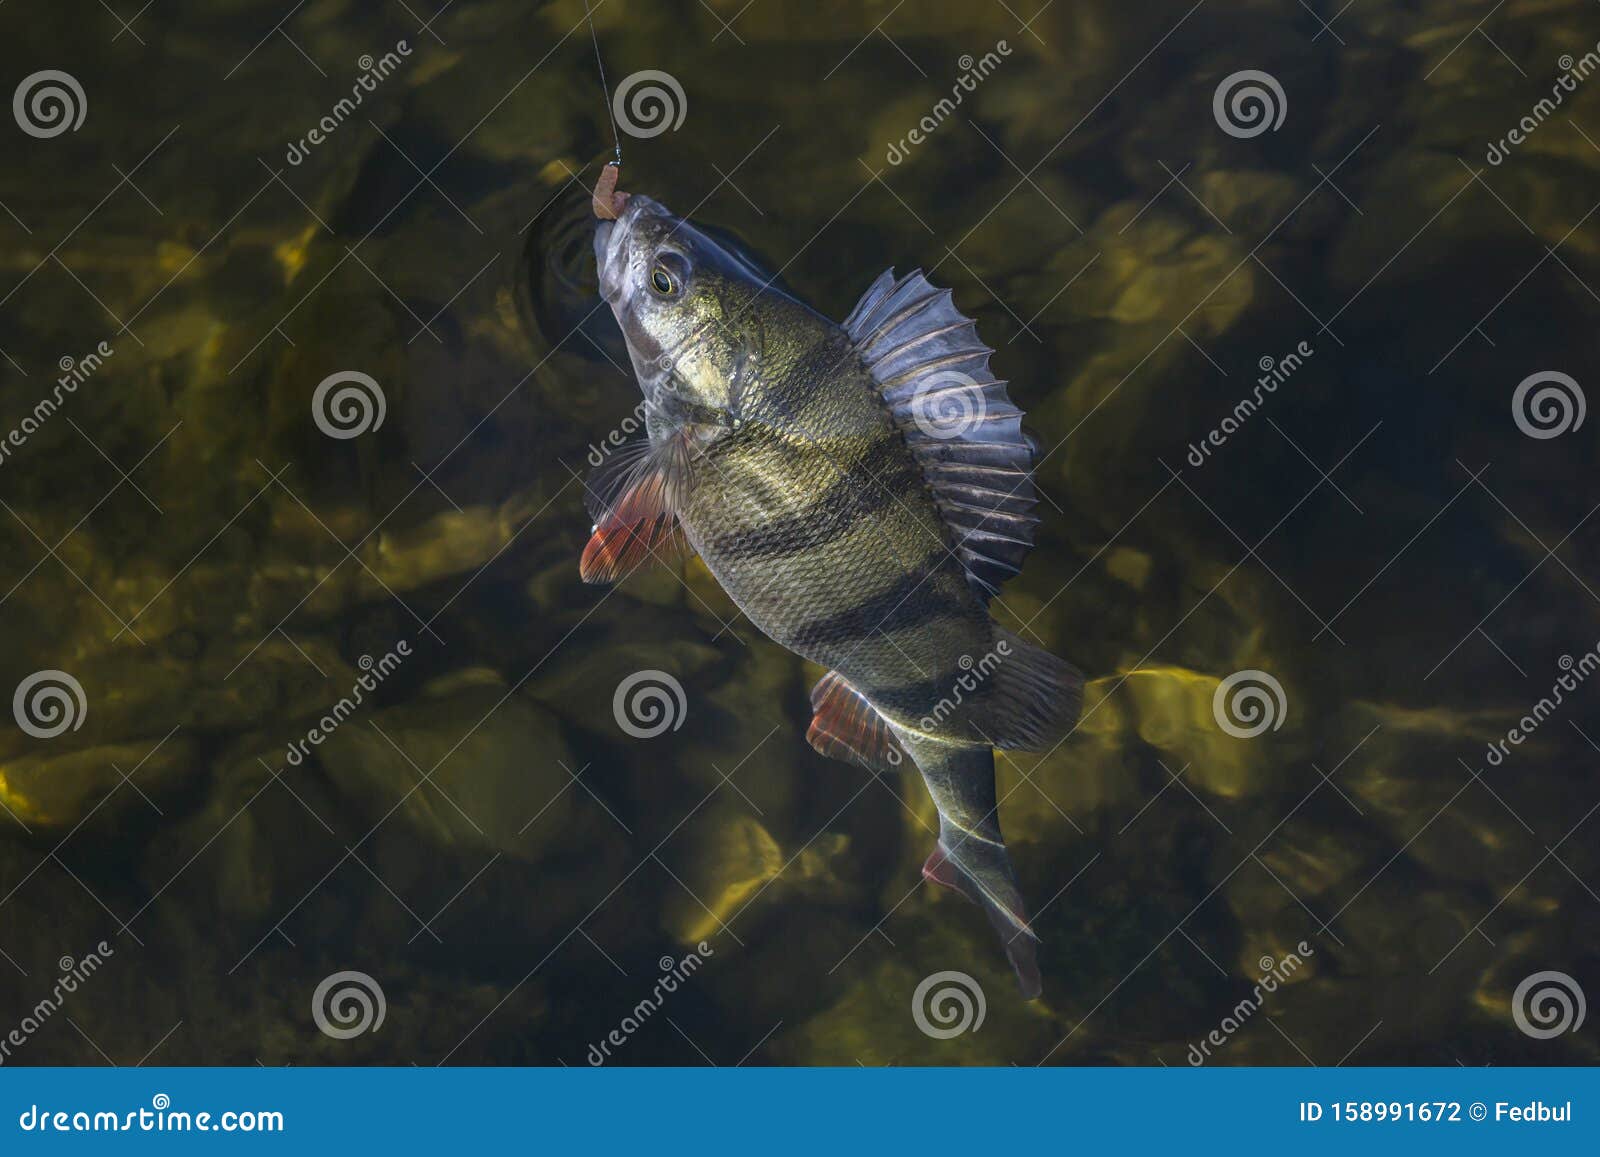 perch fish trophy in water. fishing background